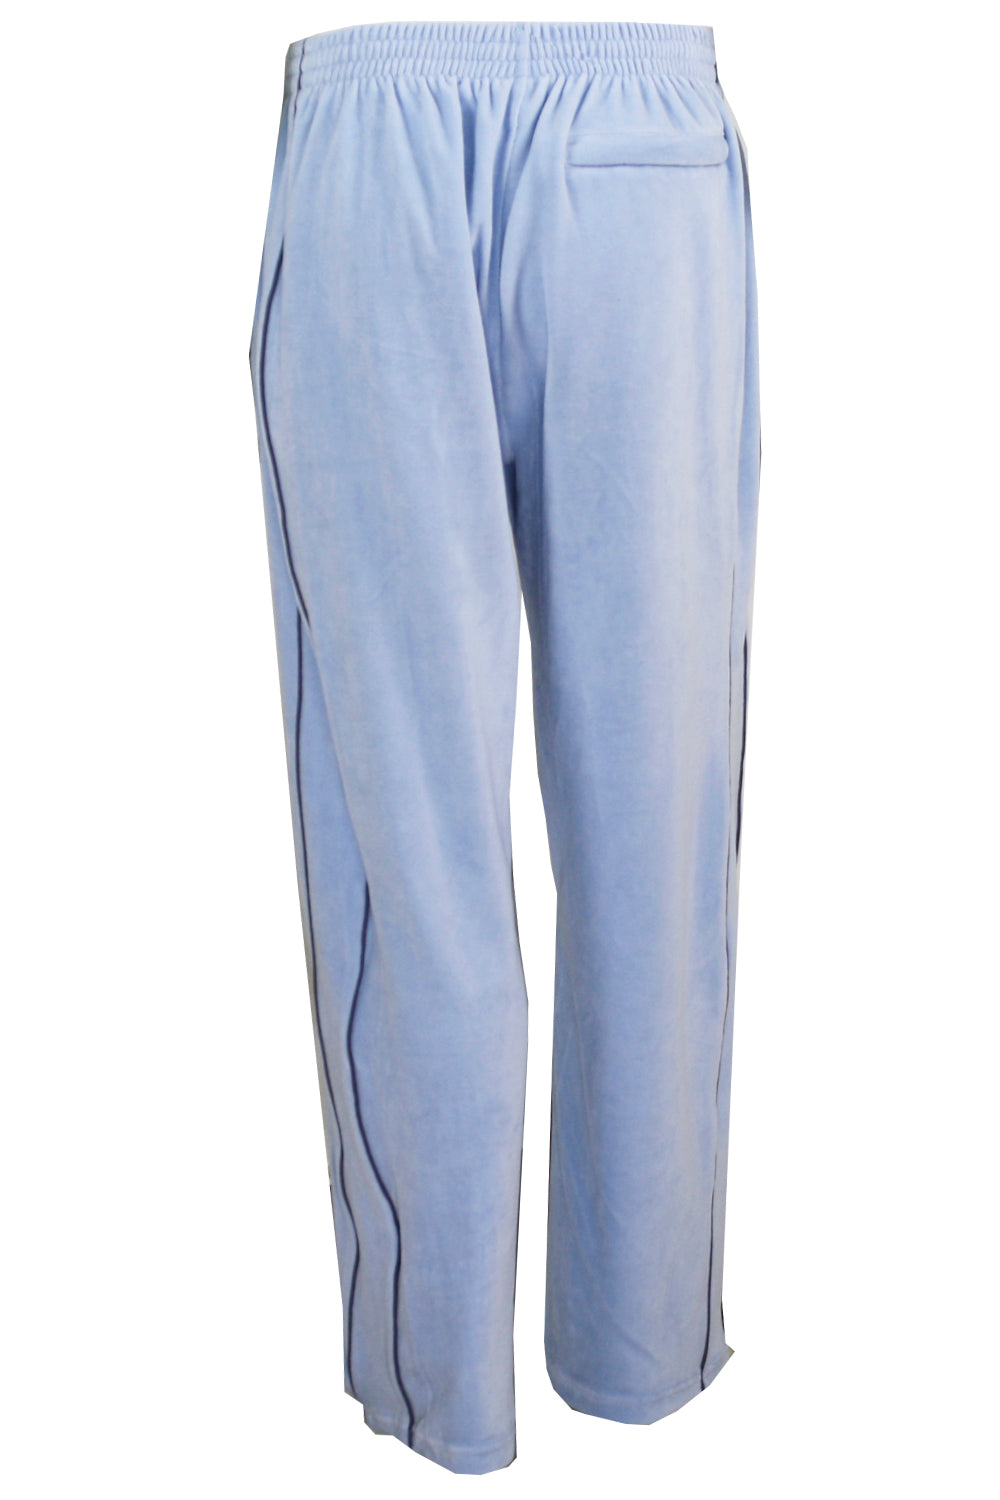 Mens Baby Blue Velour Tracksuit with Charcoal Gray Piping